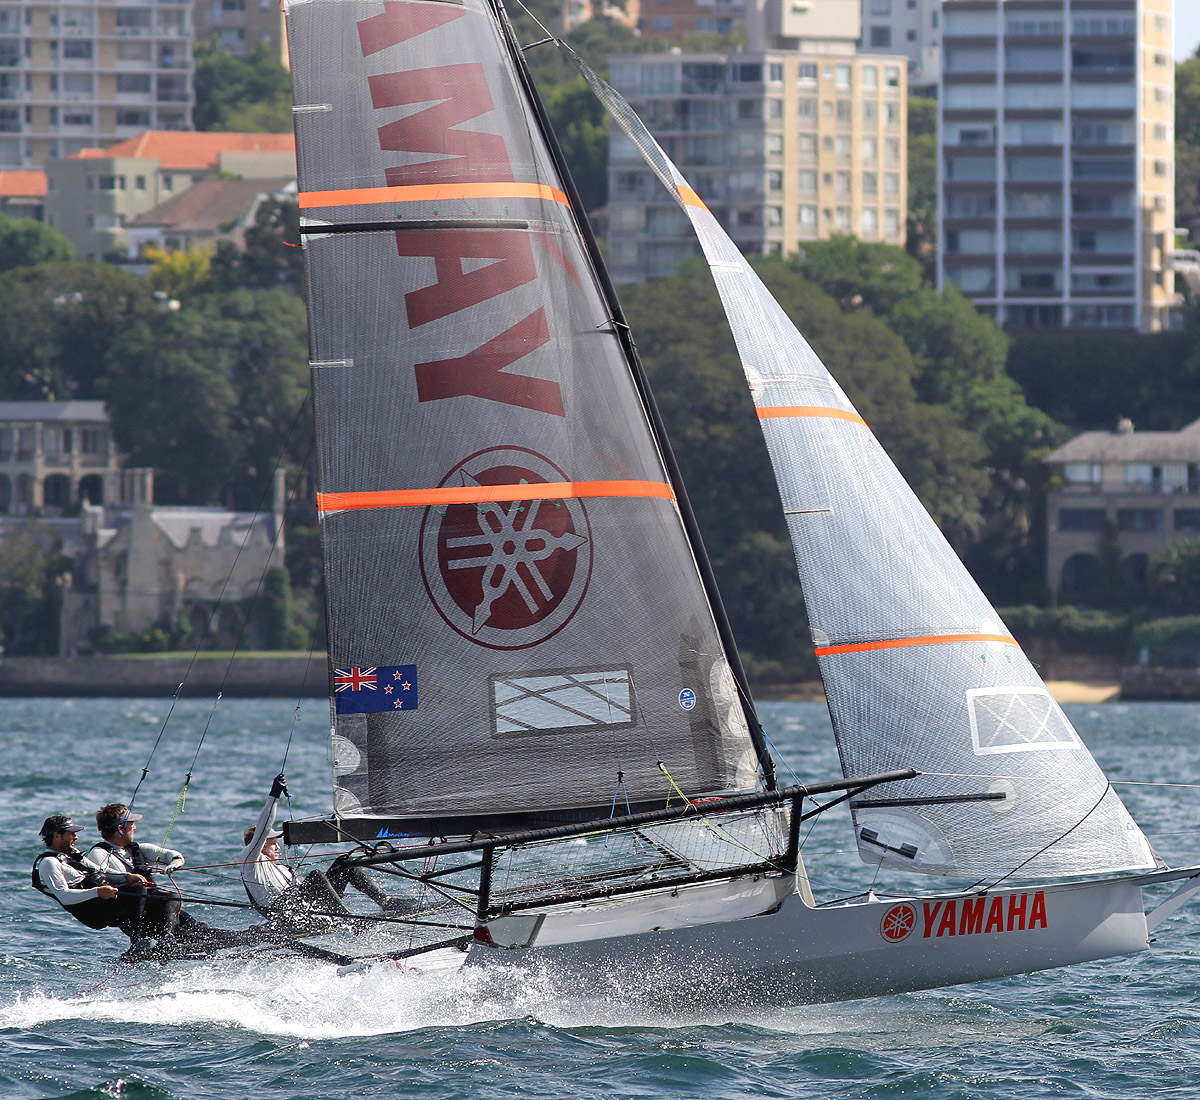 Yamaha's crew drive their skiff on the two-sail reach